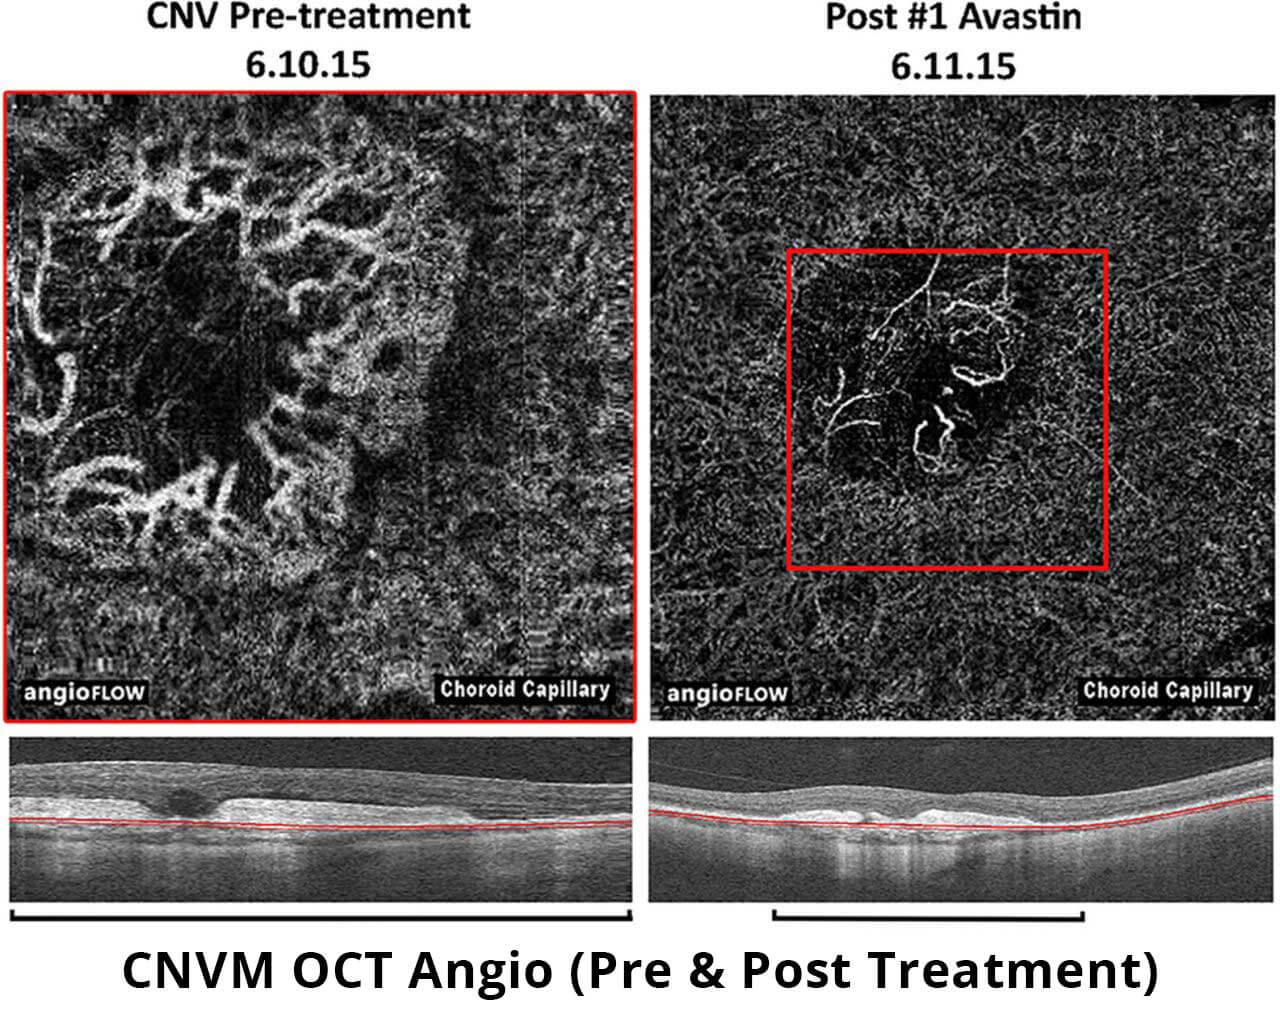 cnvm-pre-and-post-angiography-oct